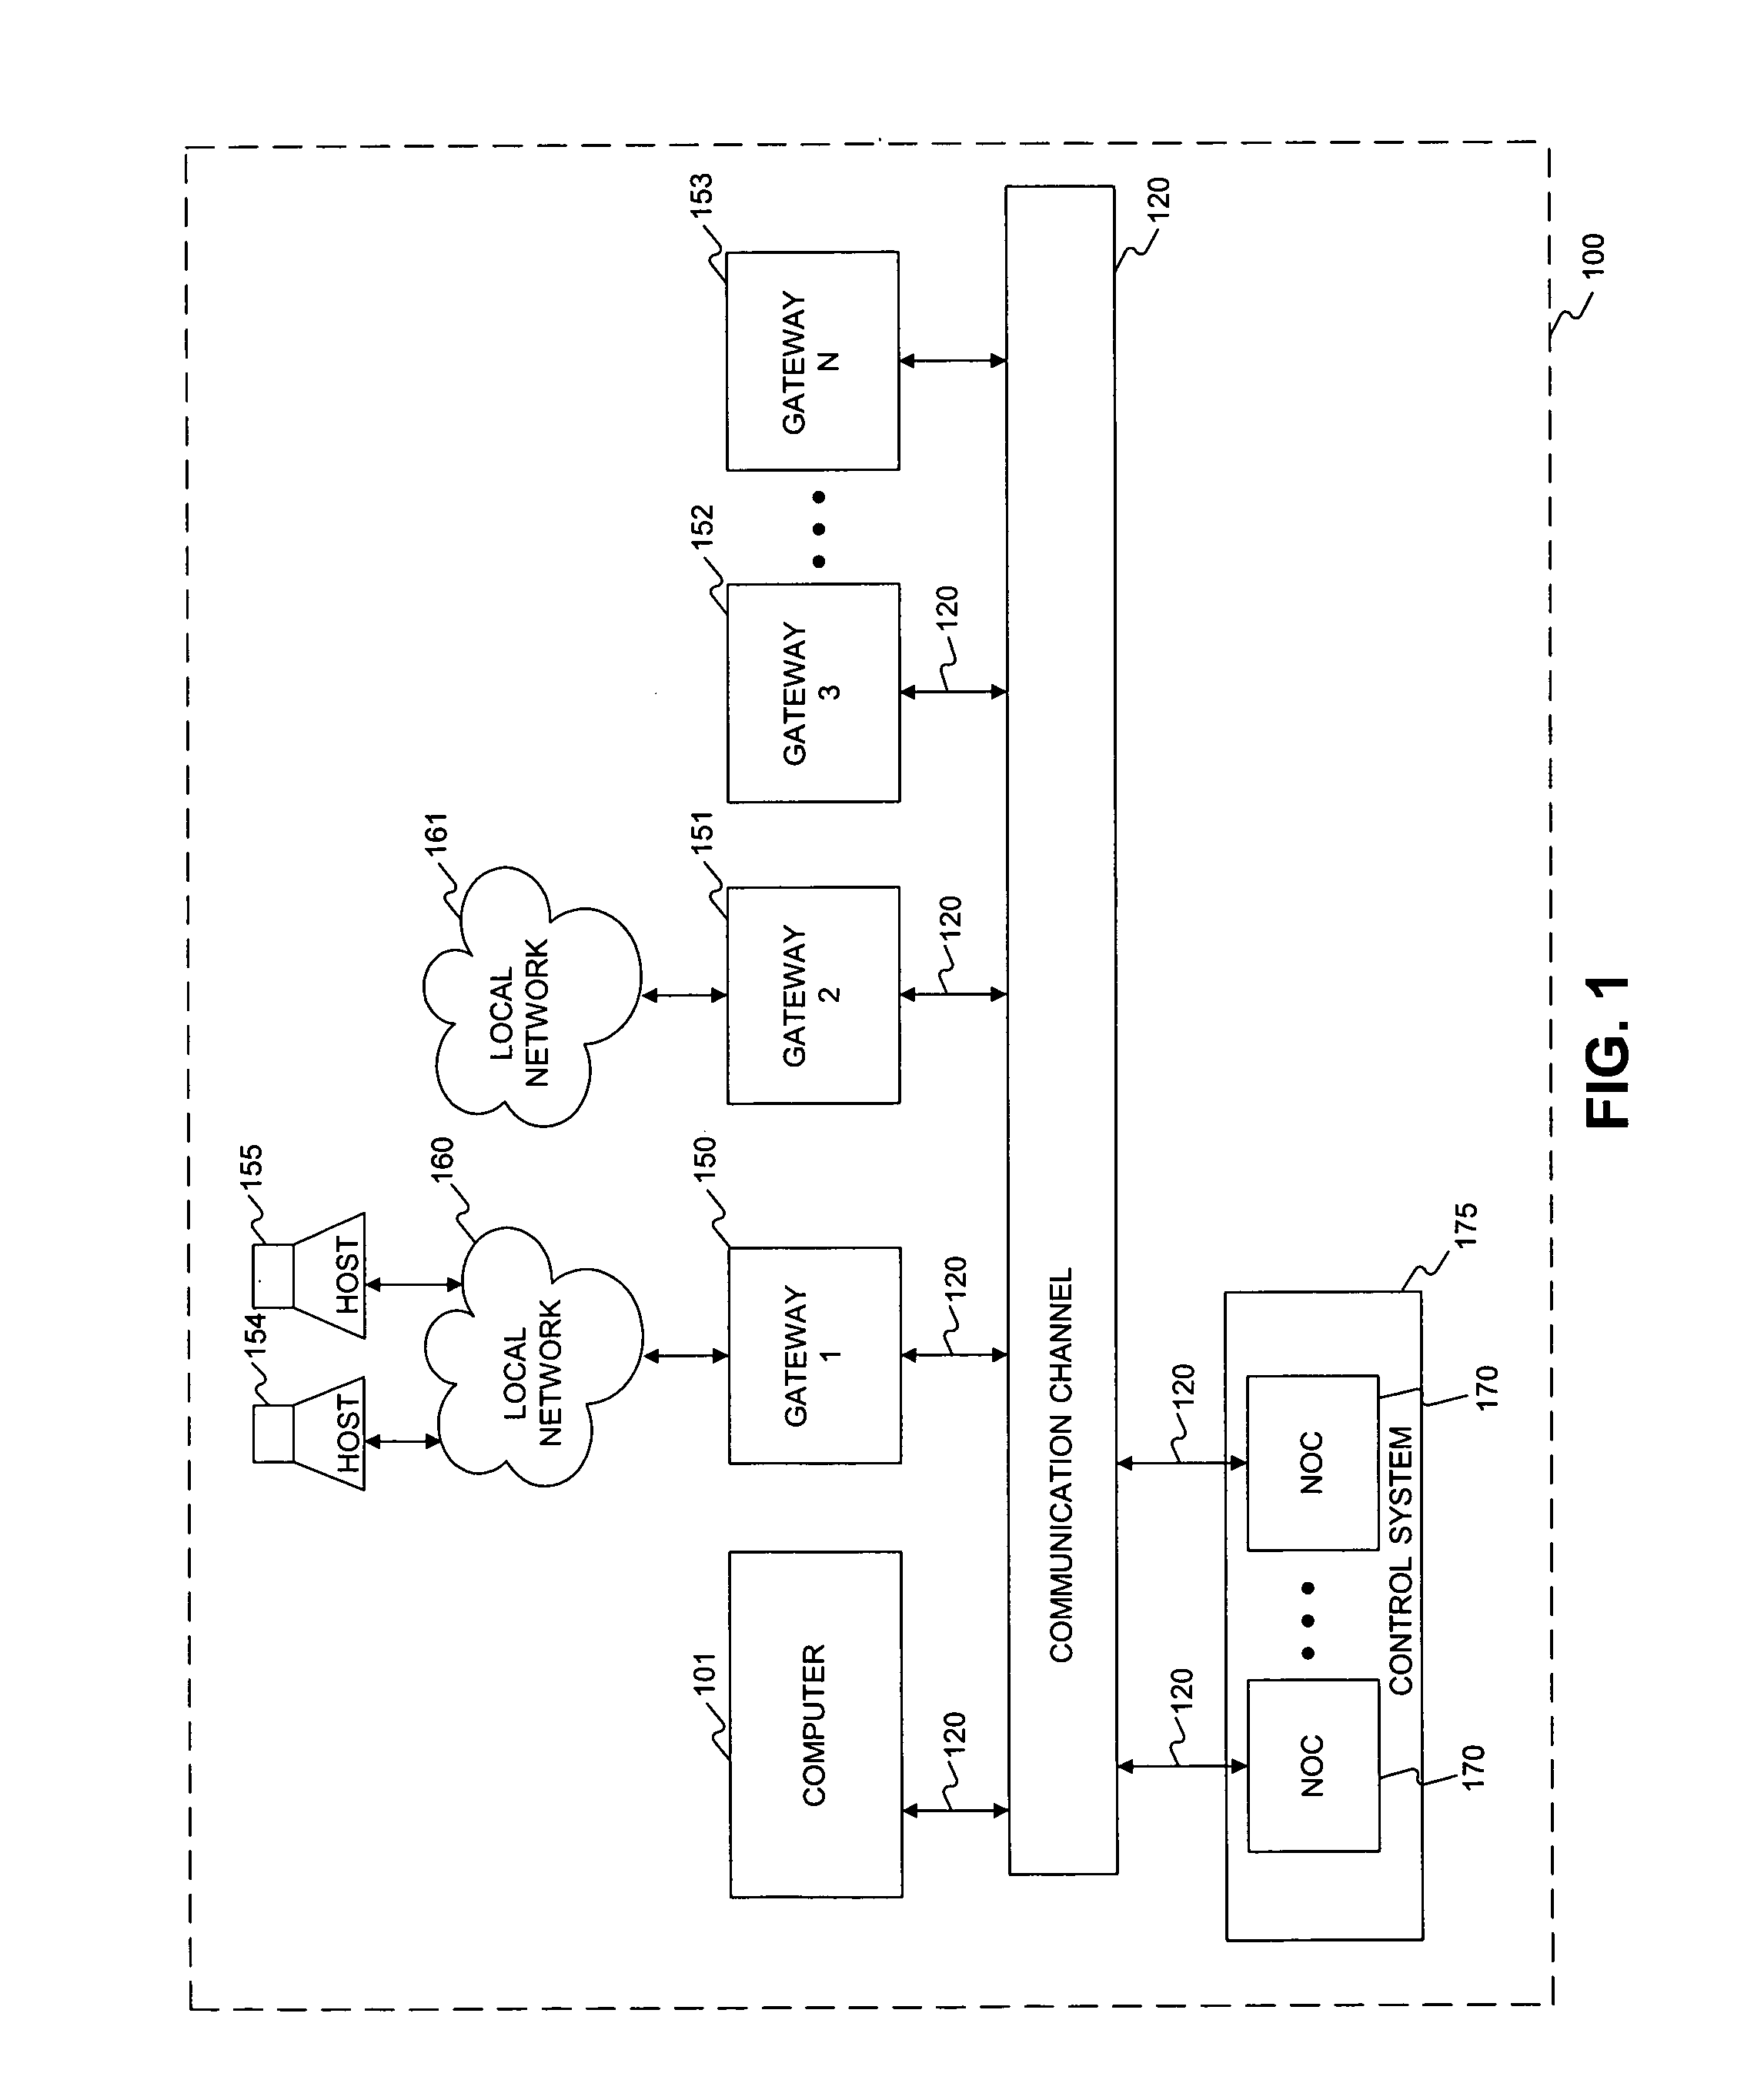 Methods and system for providing network services using at least one processor interfacing a base network